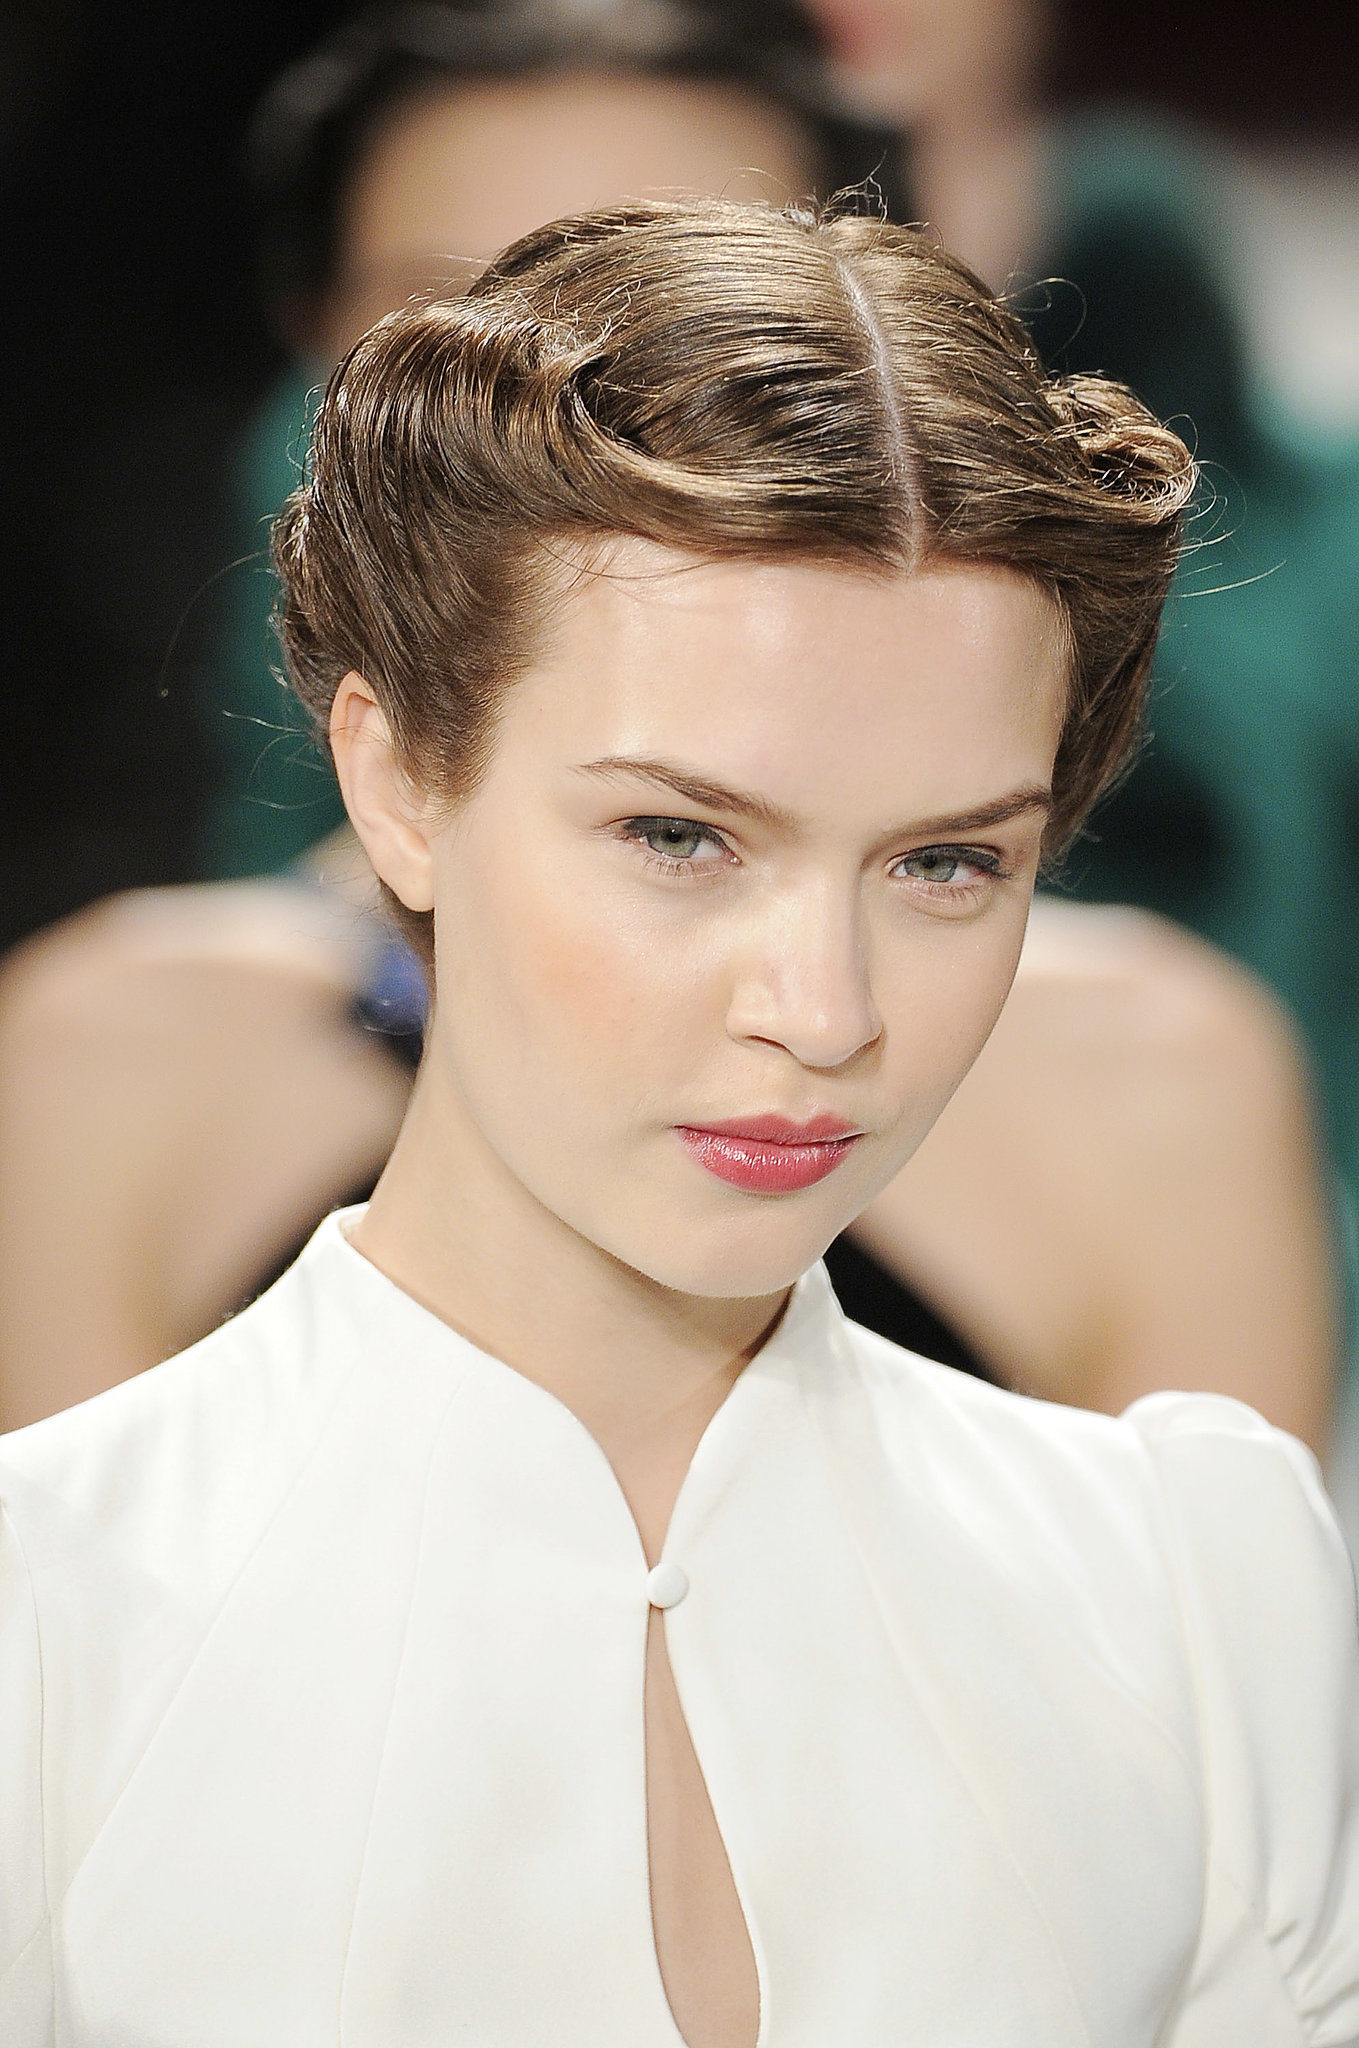 A chic '40s-style rolled updo kept the hair off the face of models in ...